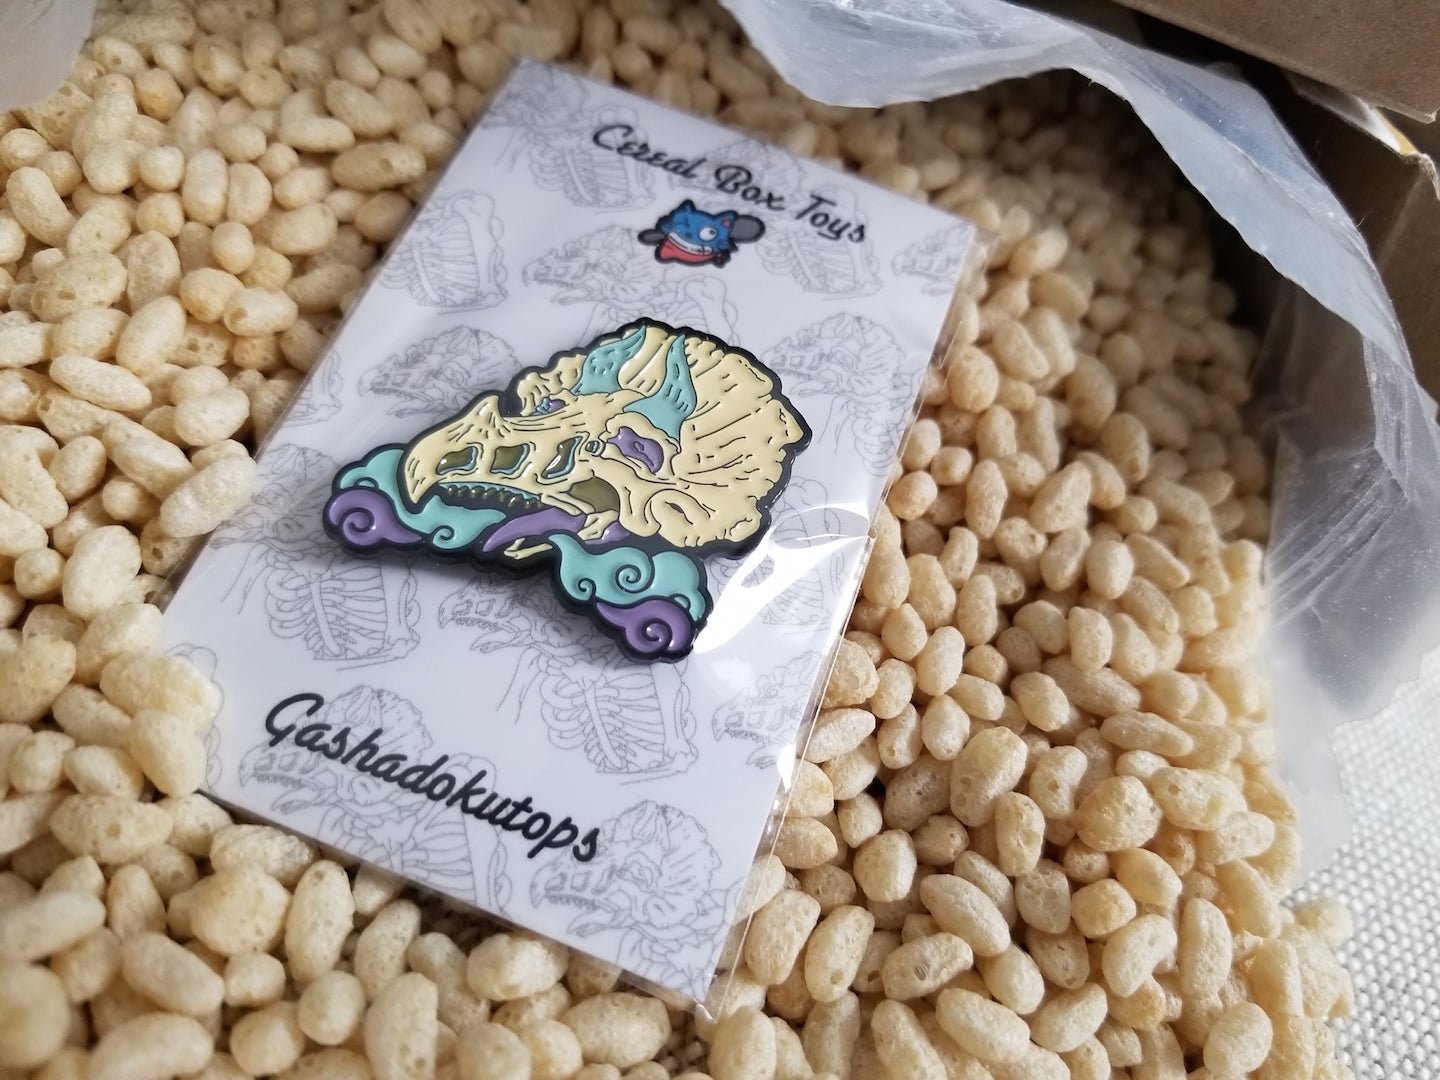 Gashadokutops Enamel Pin-Candy Floss by Cereal Box Toys